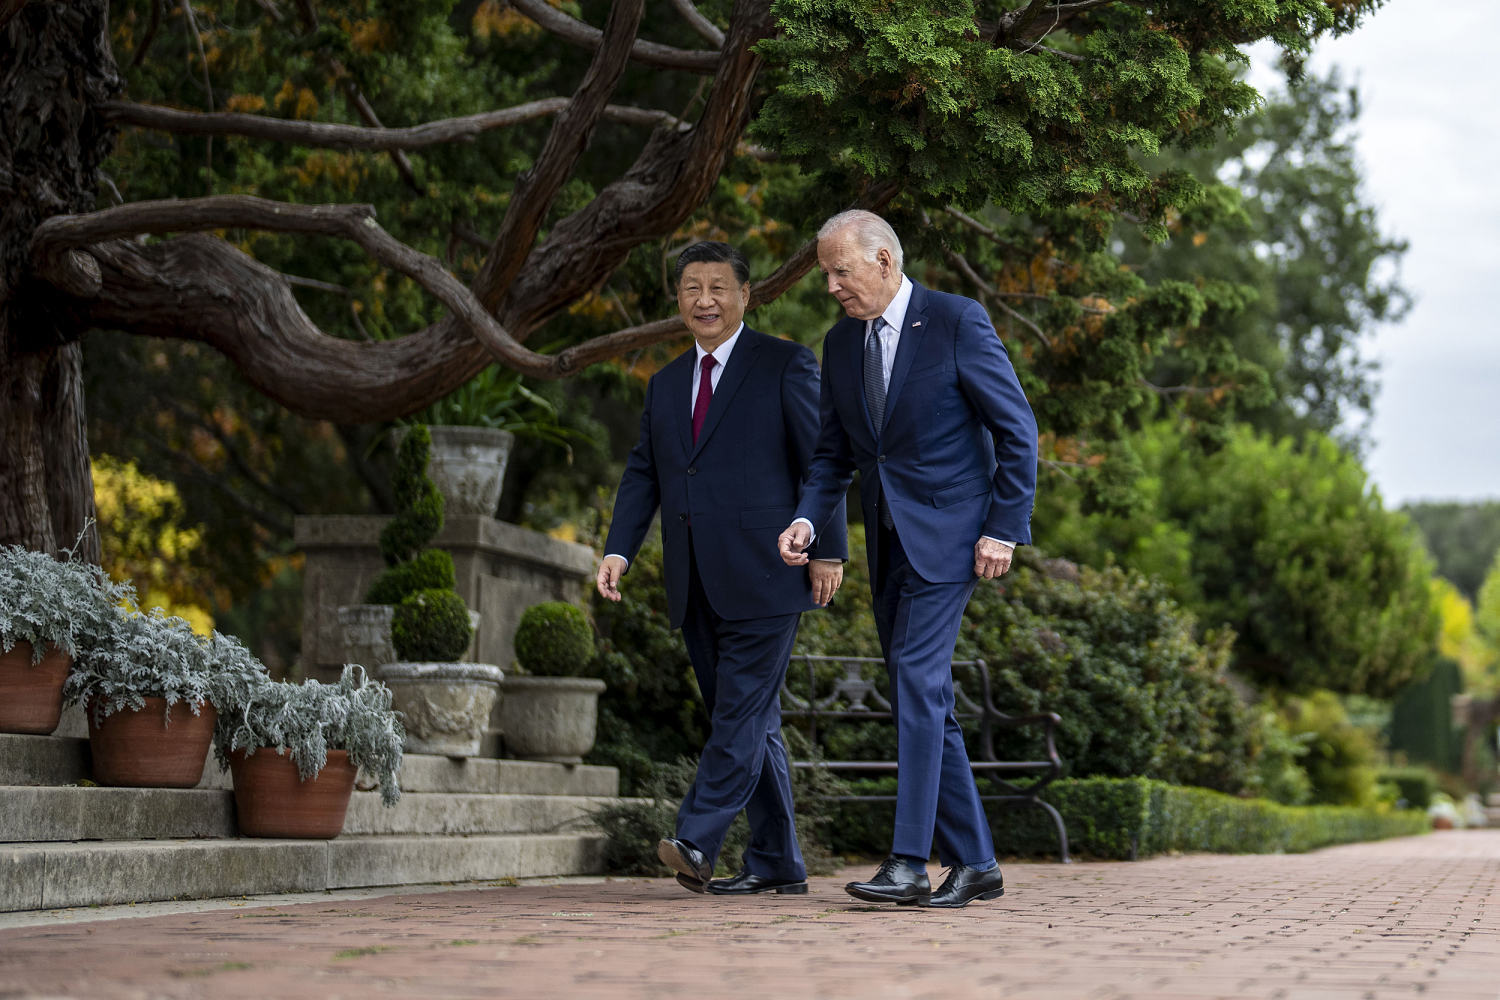 For some Uyghur Americans, worries over detained family members loom over Biden-Xi summit